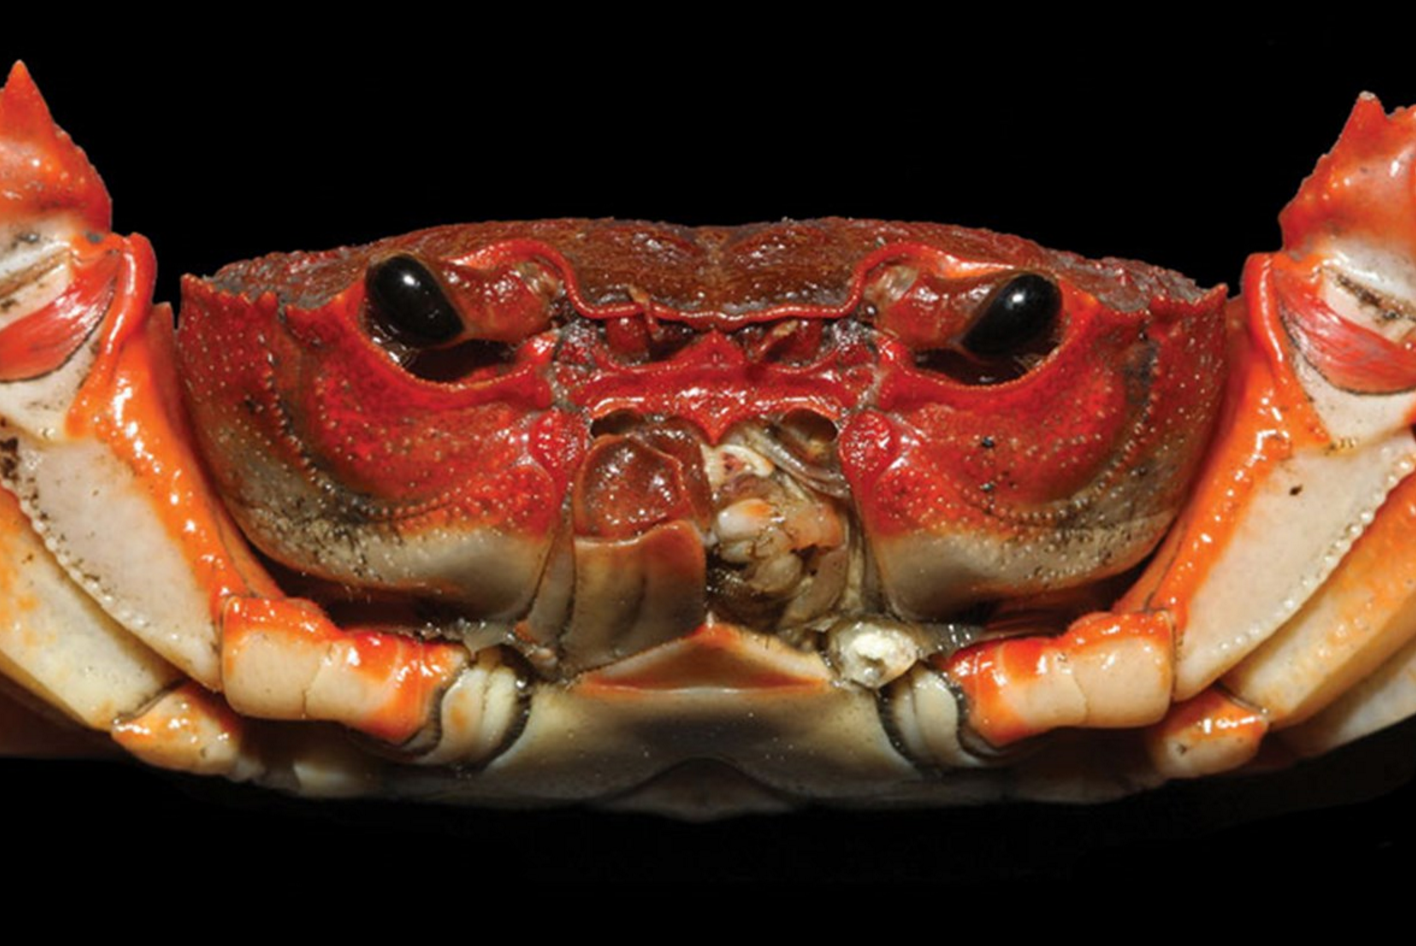 New Crab Species Discovered at Market Highlights Problems With